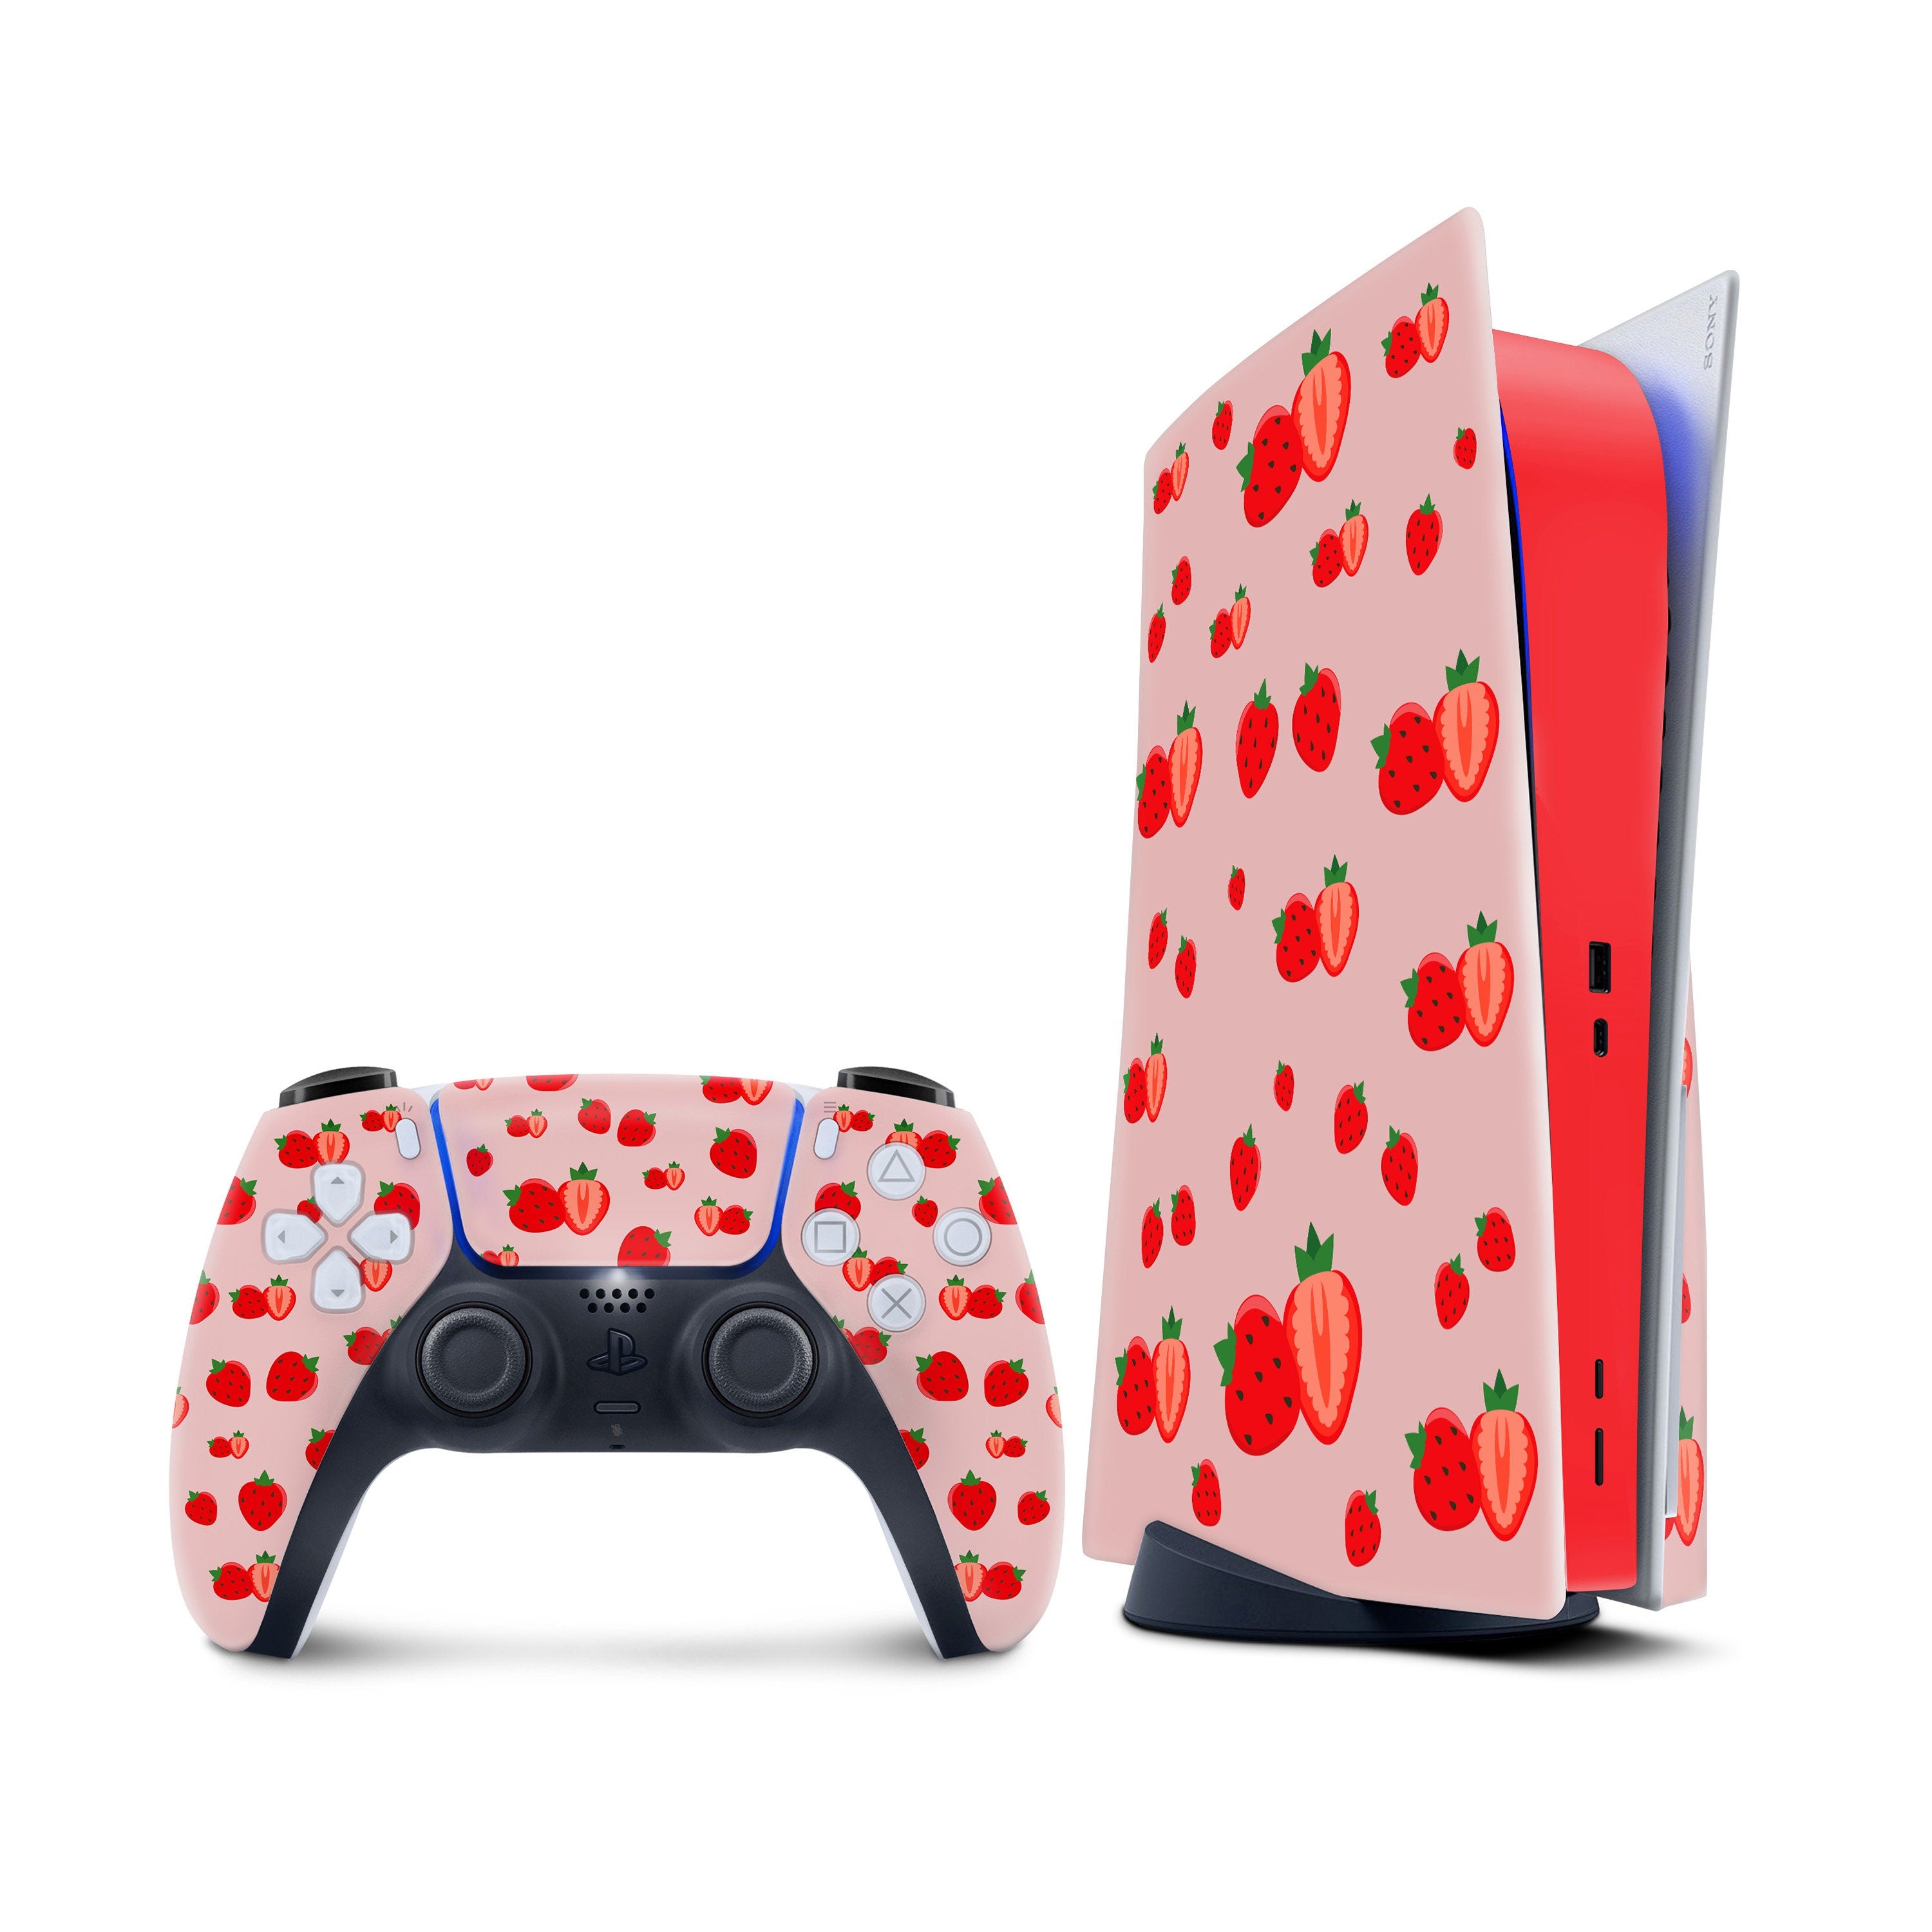 Strawberry Ps5 Sony Playstation 5 skin red, Vinyl 3m - Tackydesign